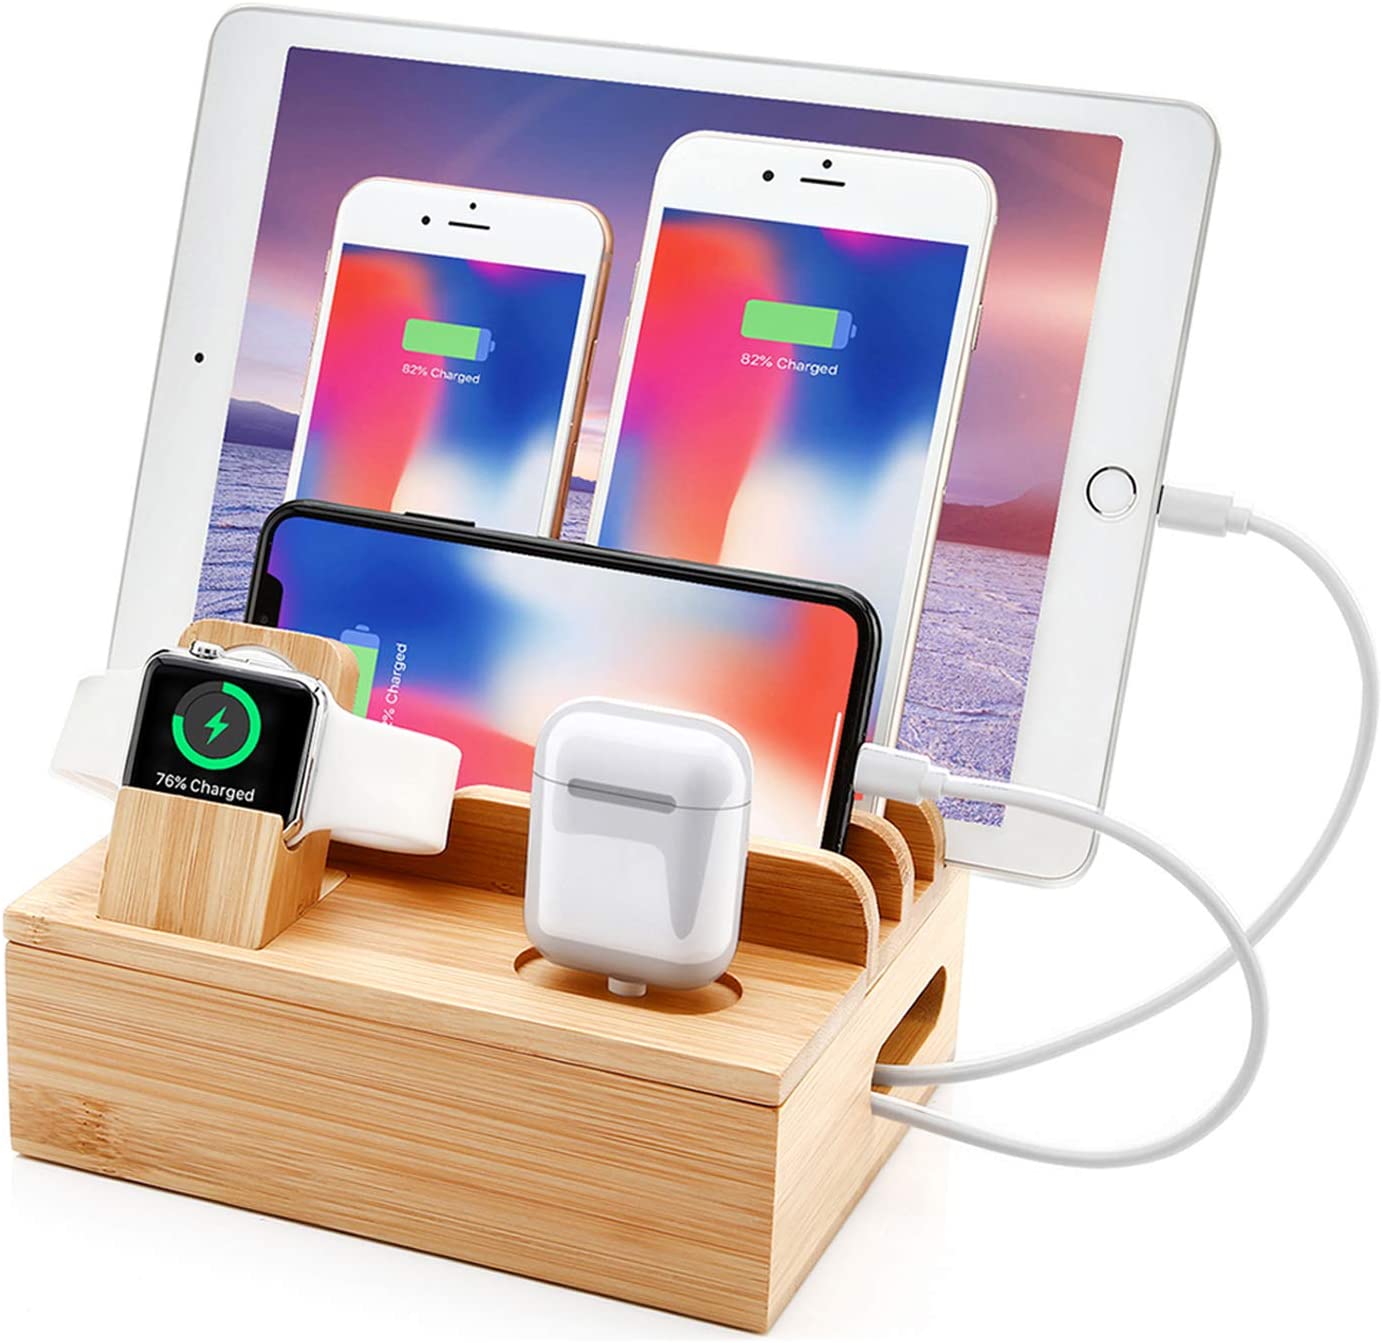 Bamboo Charging Station for Multi Device With 5 USB Charger Port Sendowtek 6 in 1